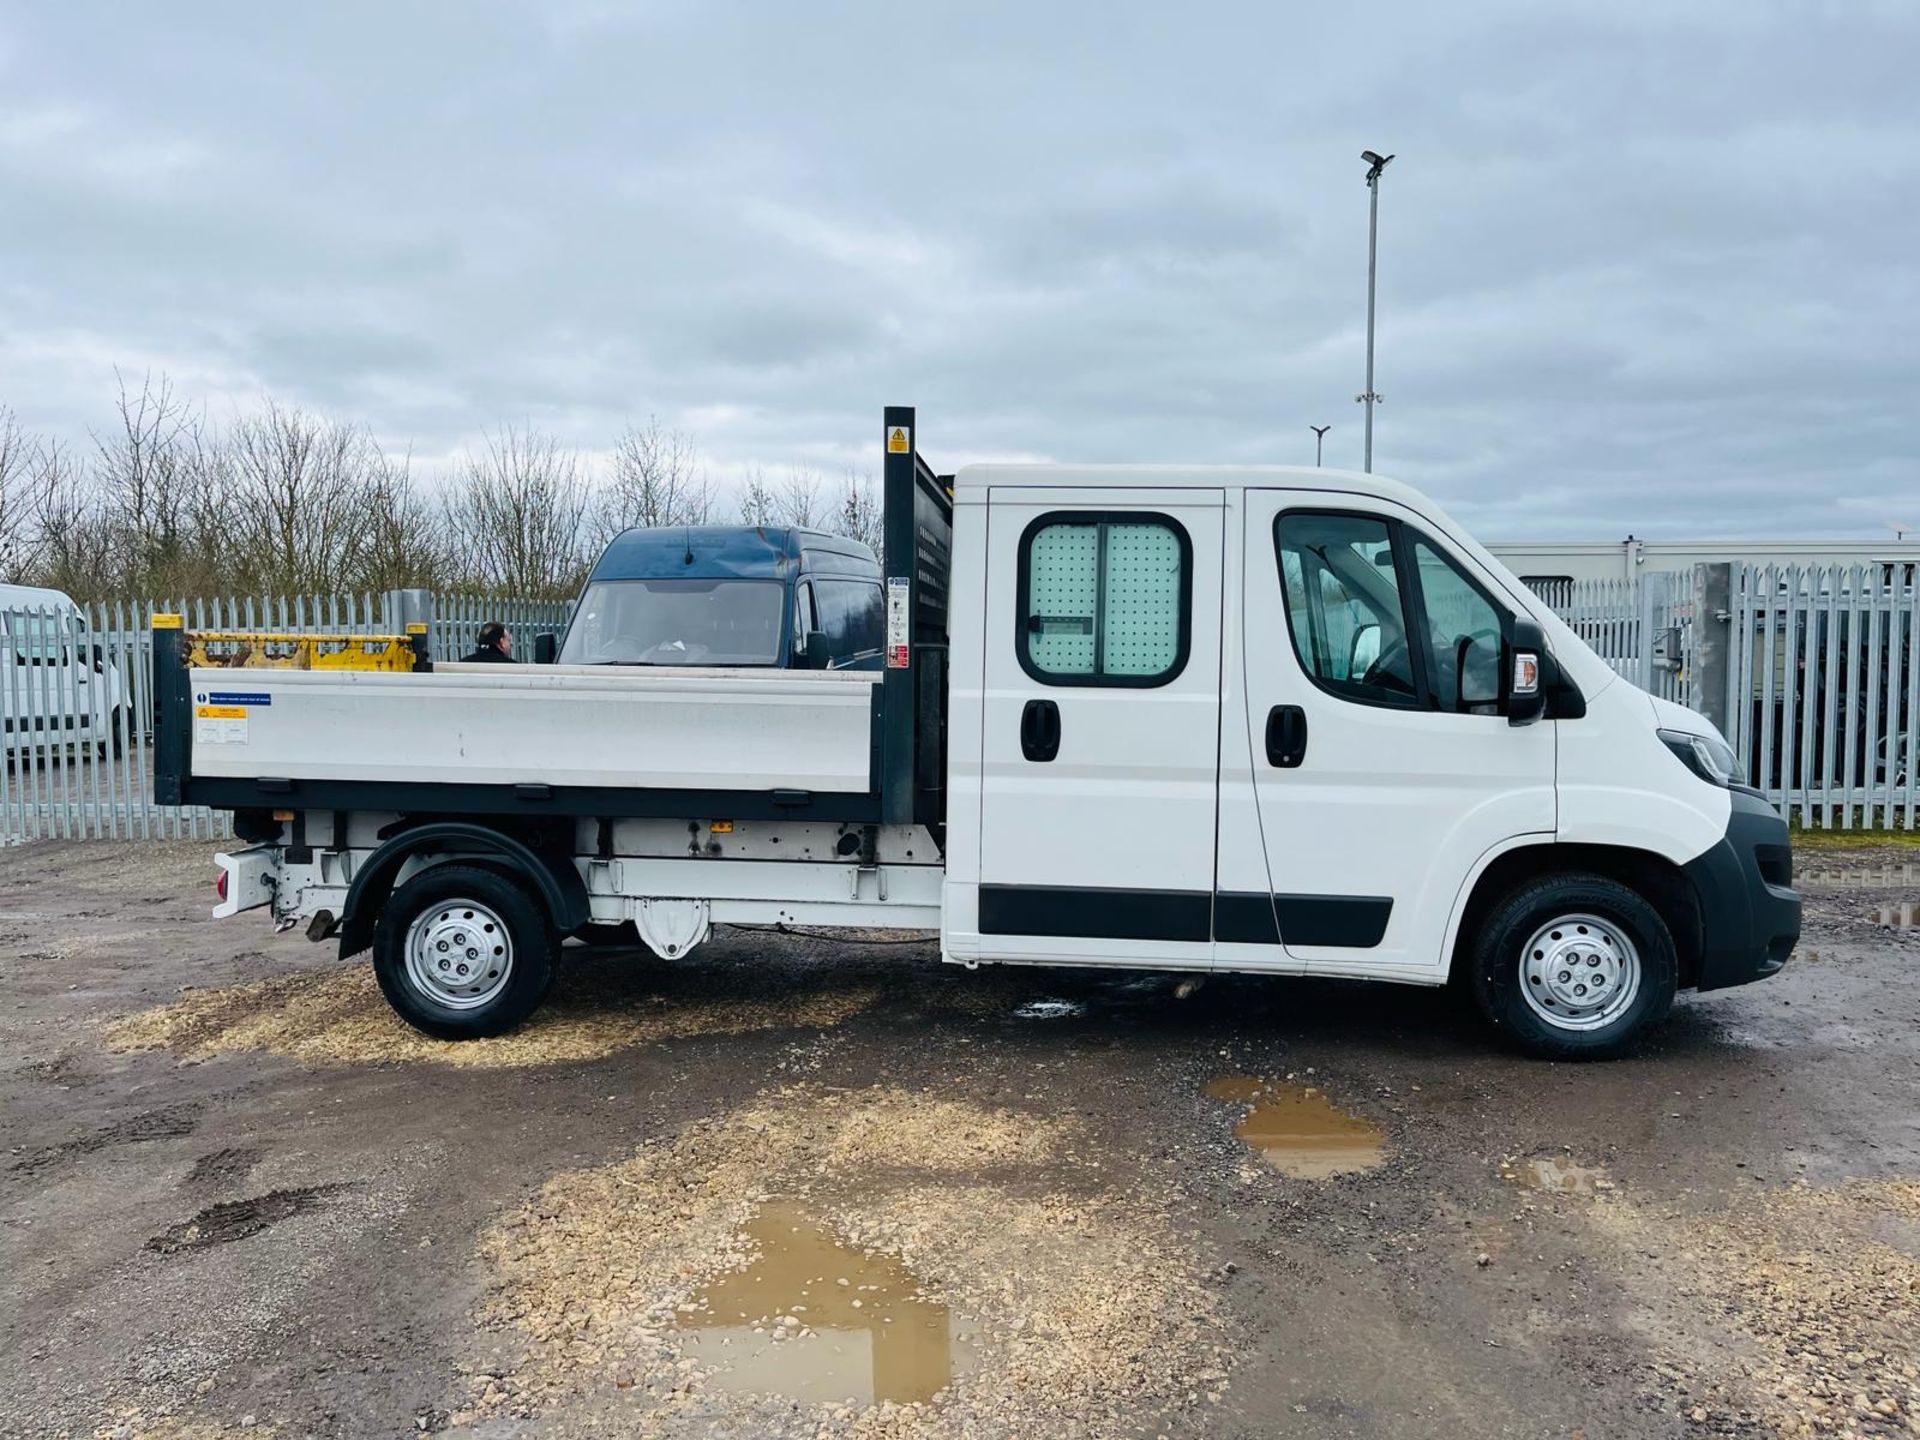 ** ON SALE ** Peugeot Boxer 335 2.2 Hdi 130 L3 CrewCab Tipper 2015 '15 Reg' ONLY 56,897 mile - Image 14 of 31